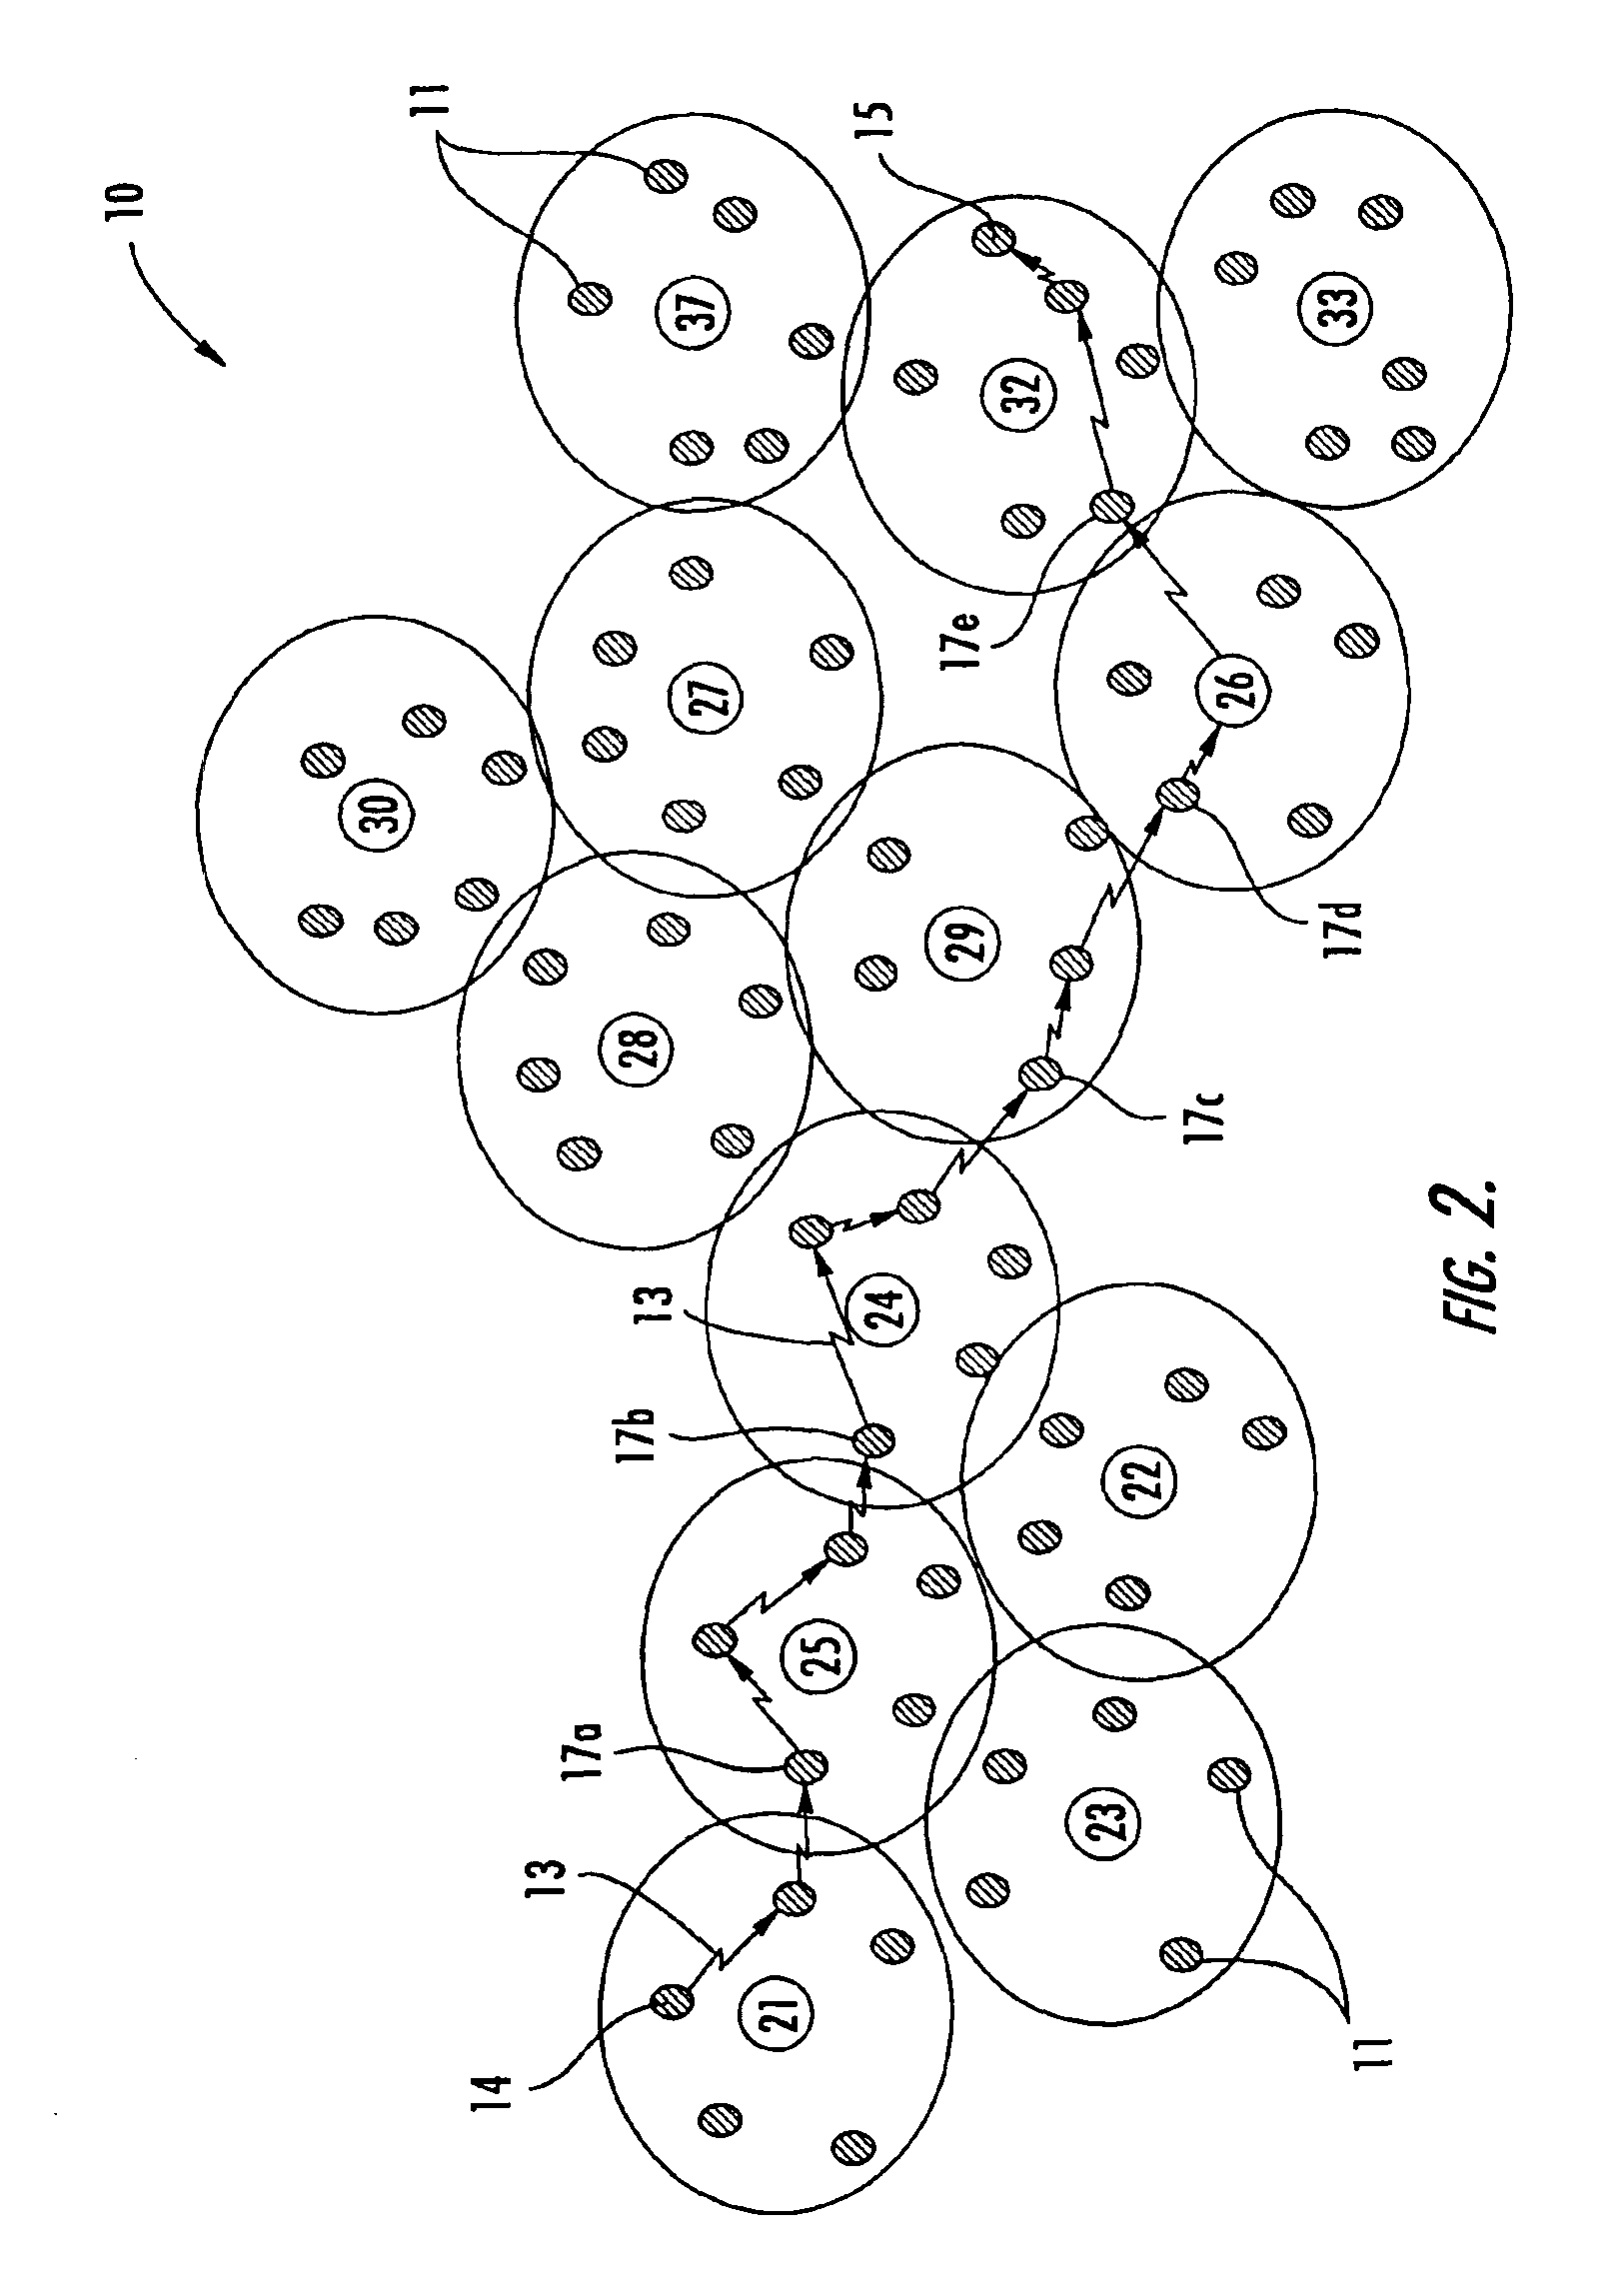 Hierarchical mobile ad-hoc network and methods for performing reactive routing therein using dynamic source routing (DSR)